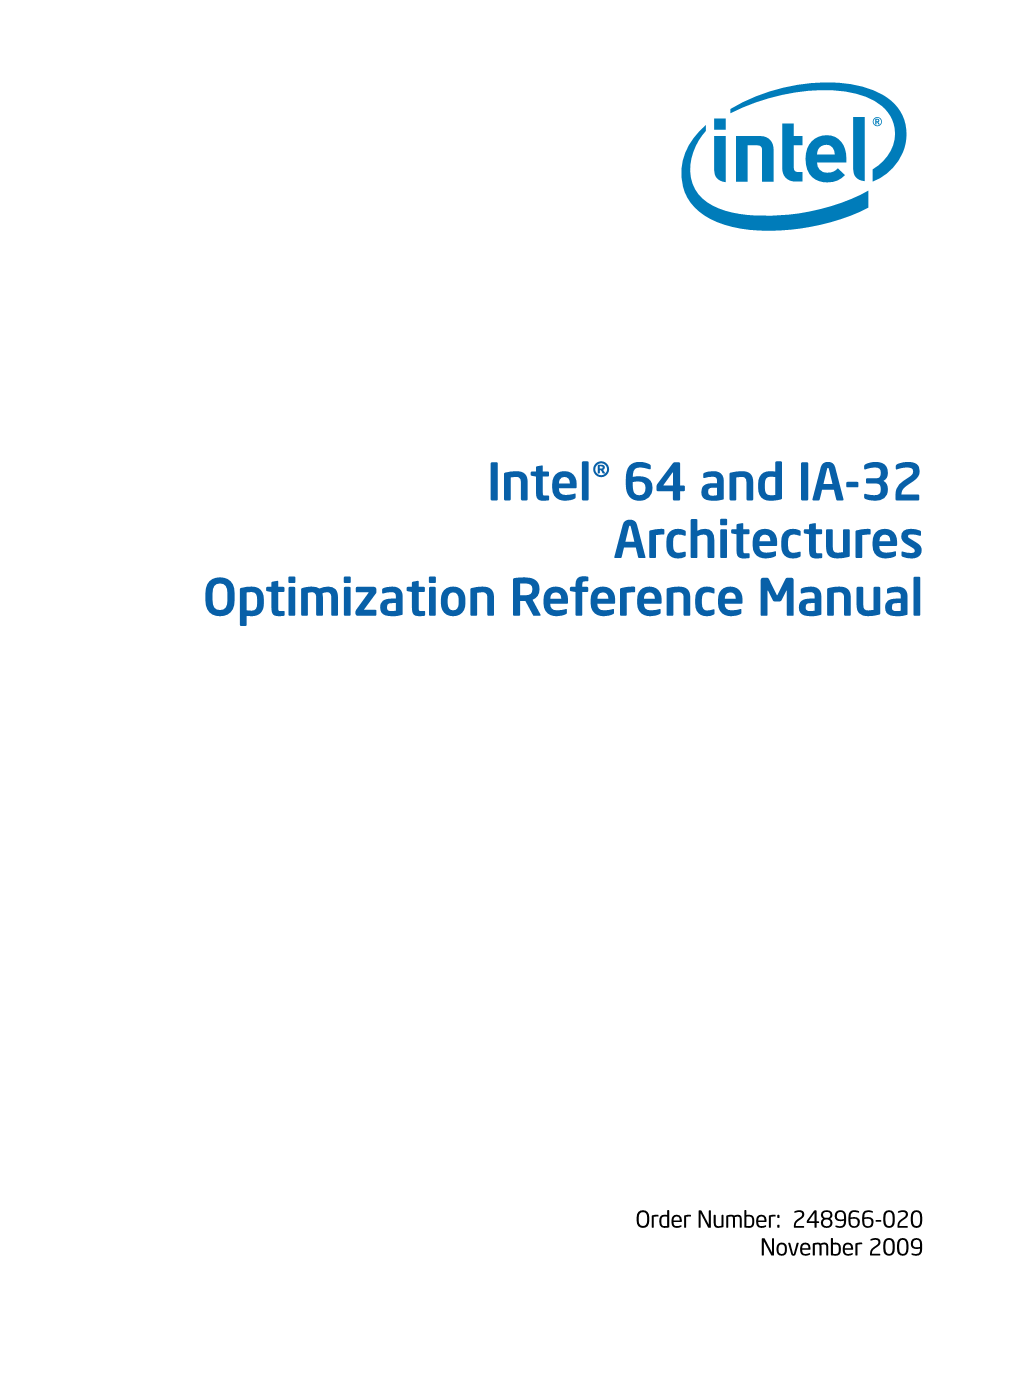 Intel(R) 64 and IA-32 Architectures Optimization Reference Manual